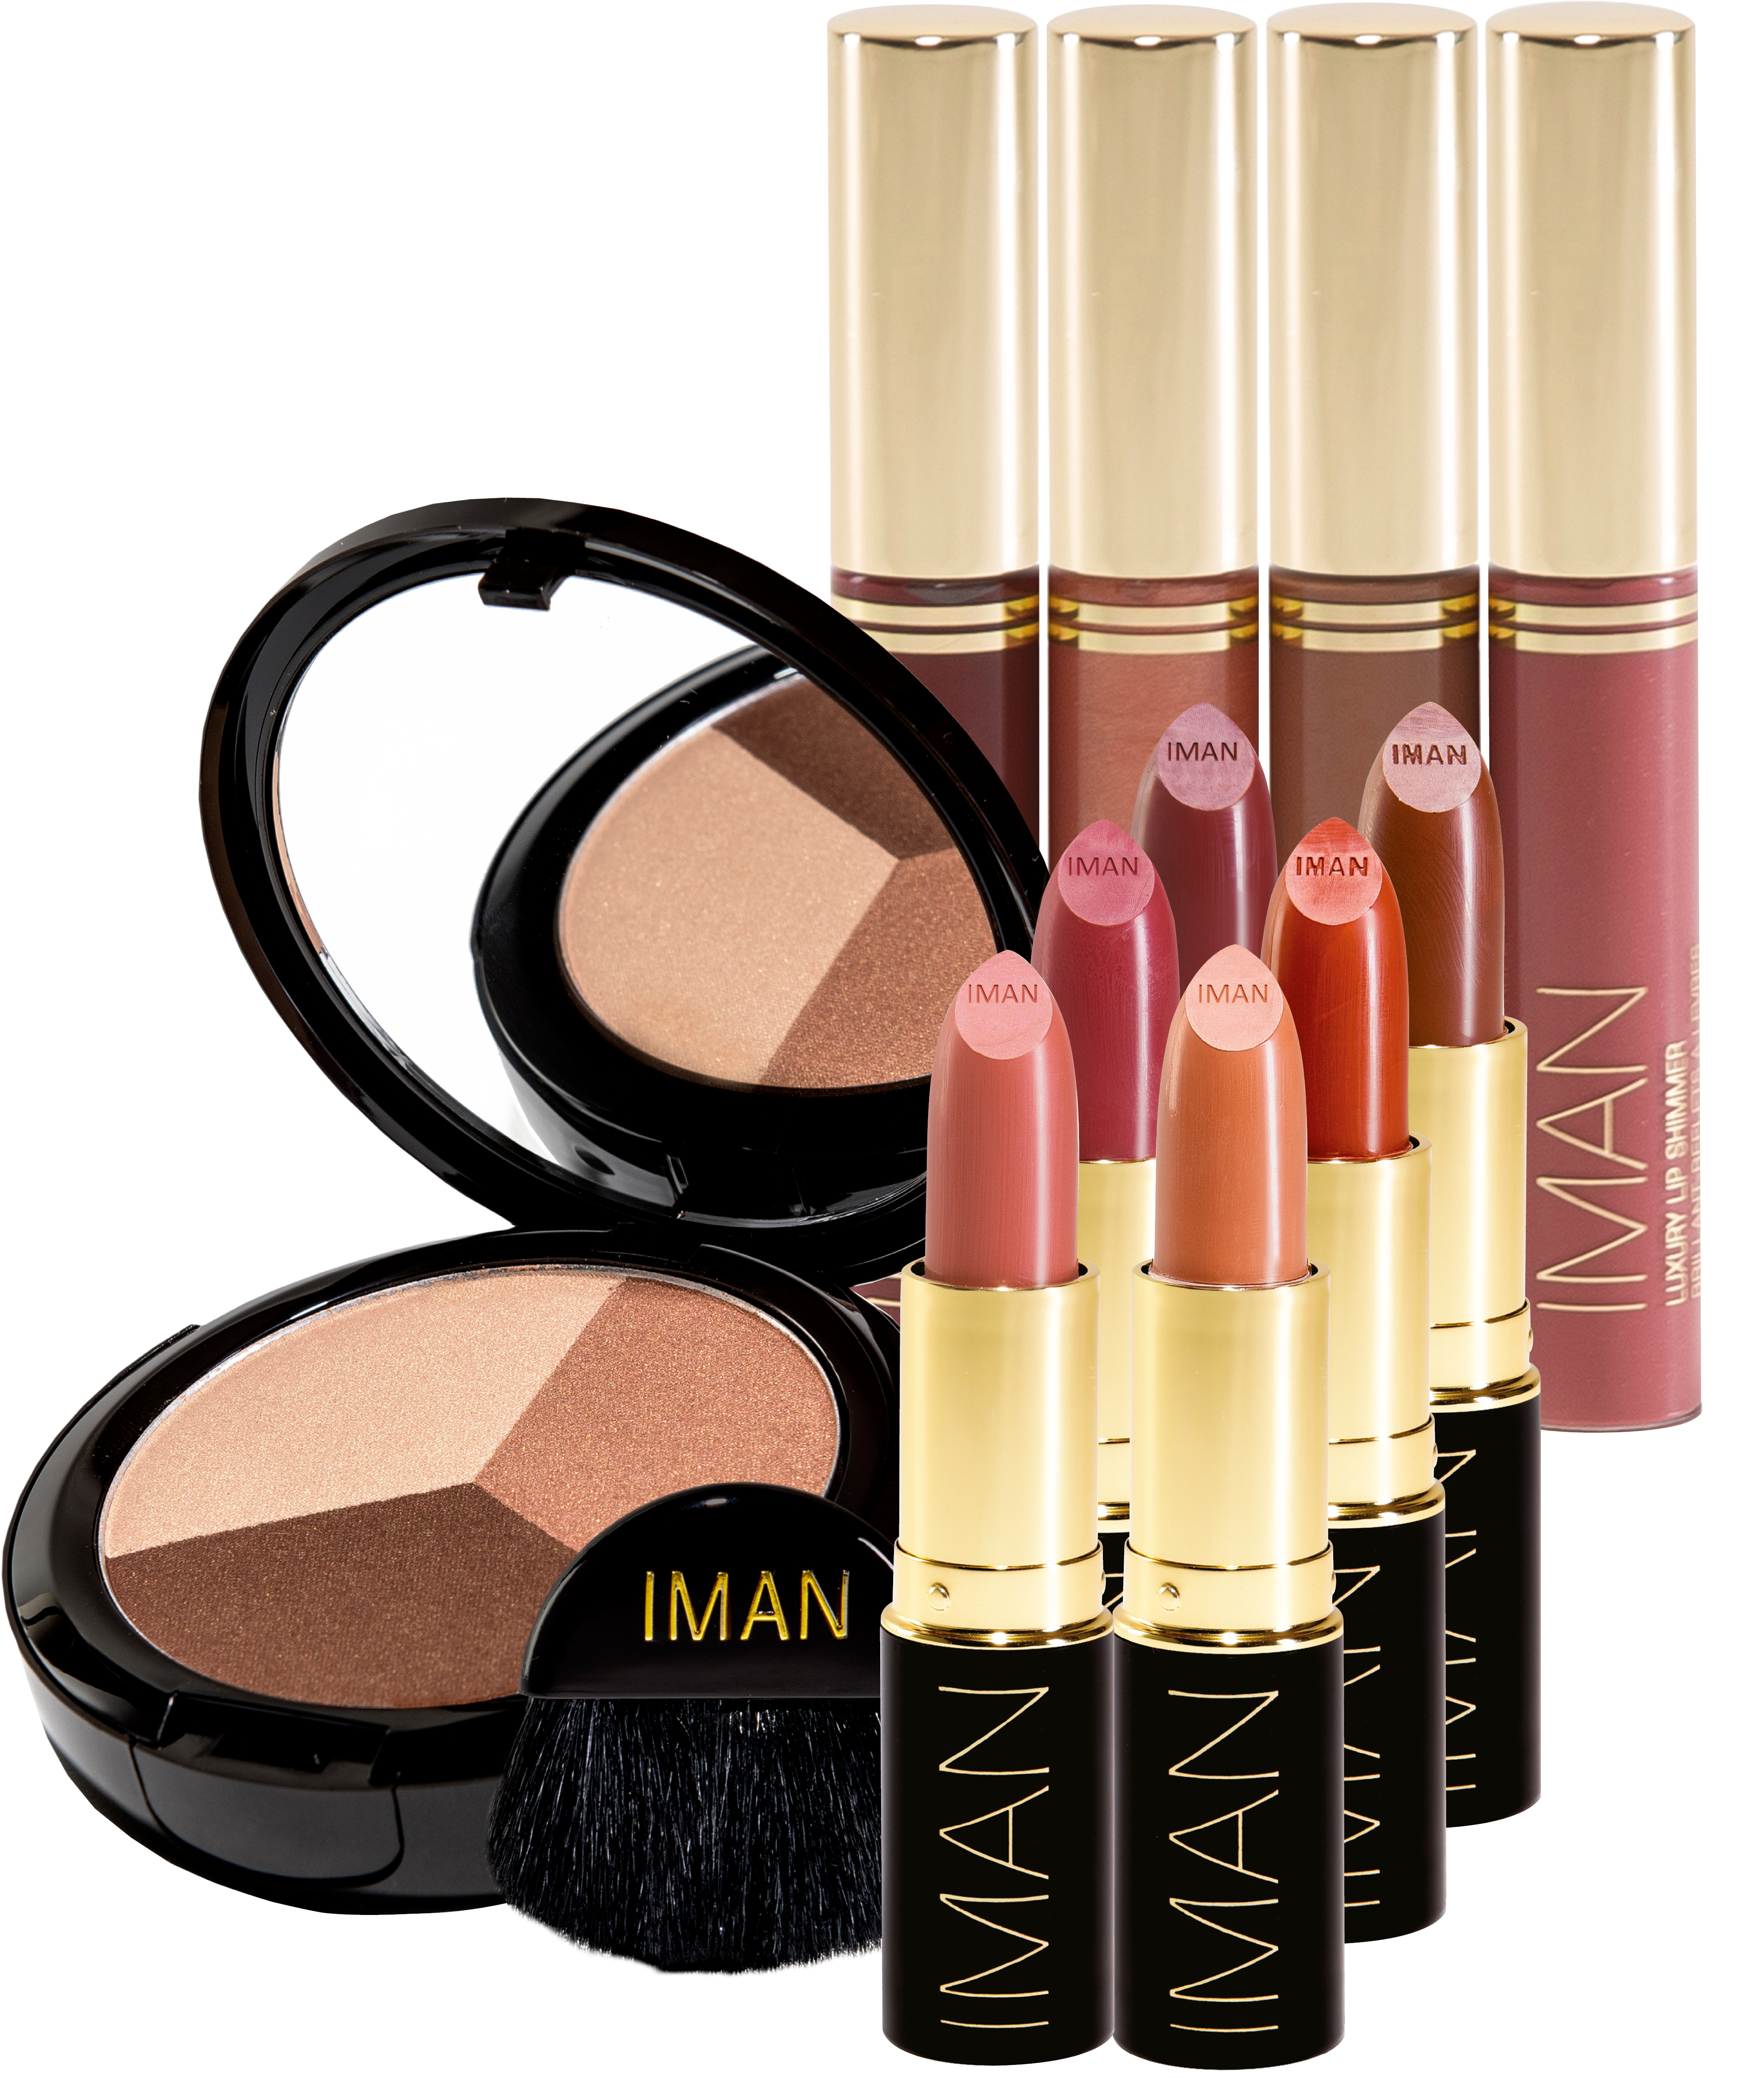 iman cosmetics collection alter ego